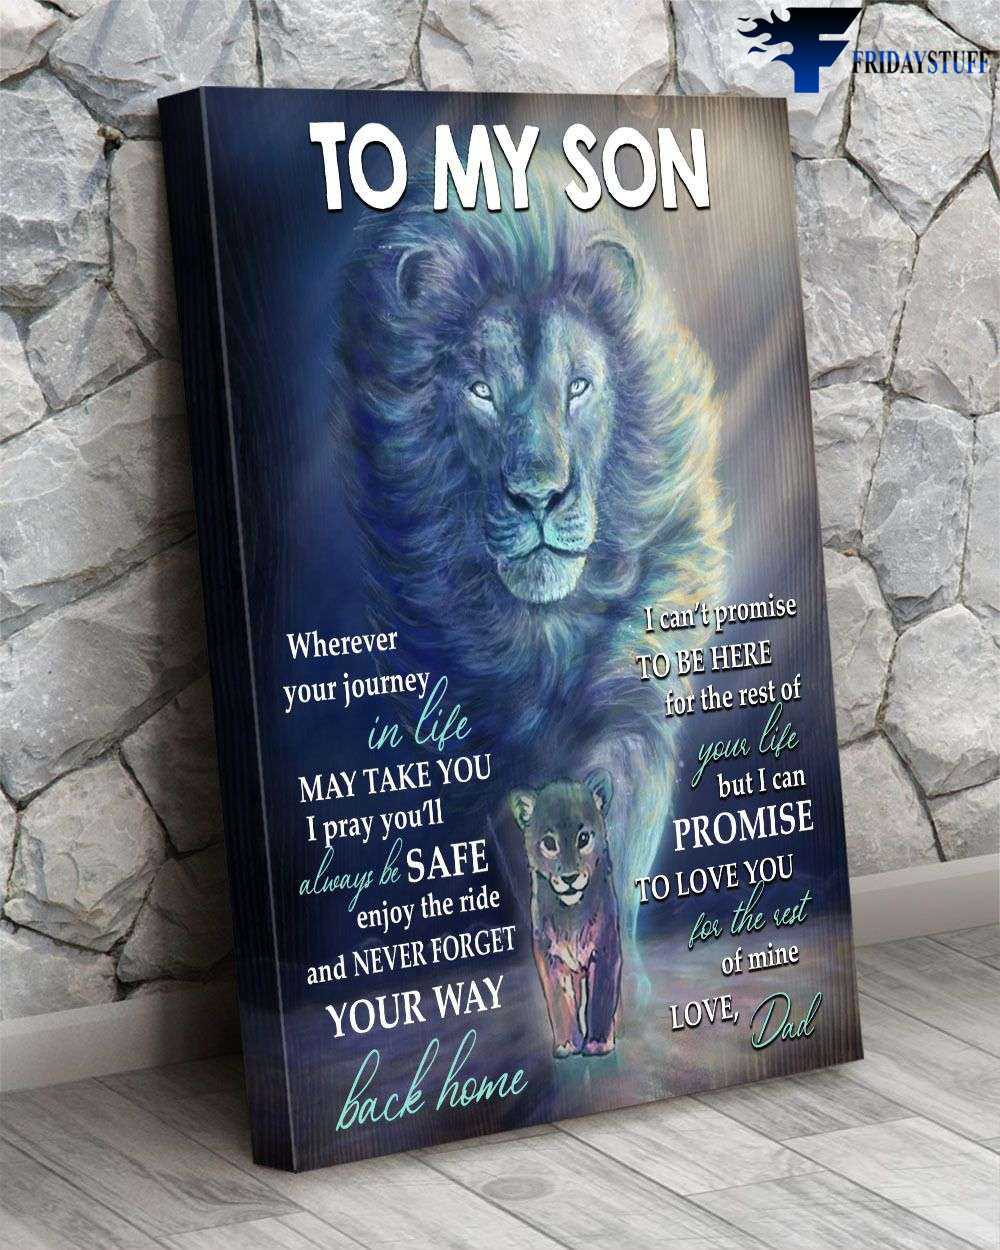 Dad And Son, Lion King - To My Son, Wherever Your Journey, In Life May Take You, I Pray You’ll Always Be Safe, Enjoy The Ride, And Never Forget, Your Way Back Home, I Can’t Promise To Be Here For The Rest Of Your Life